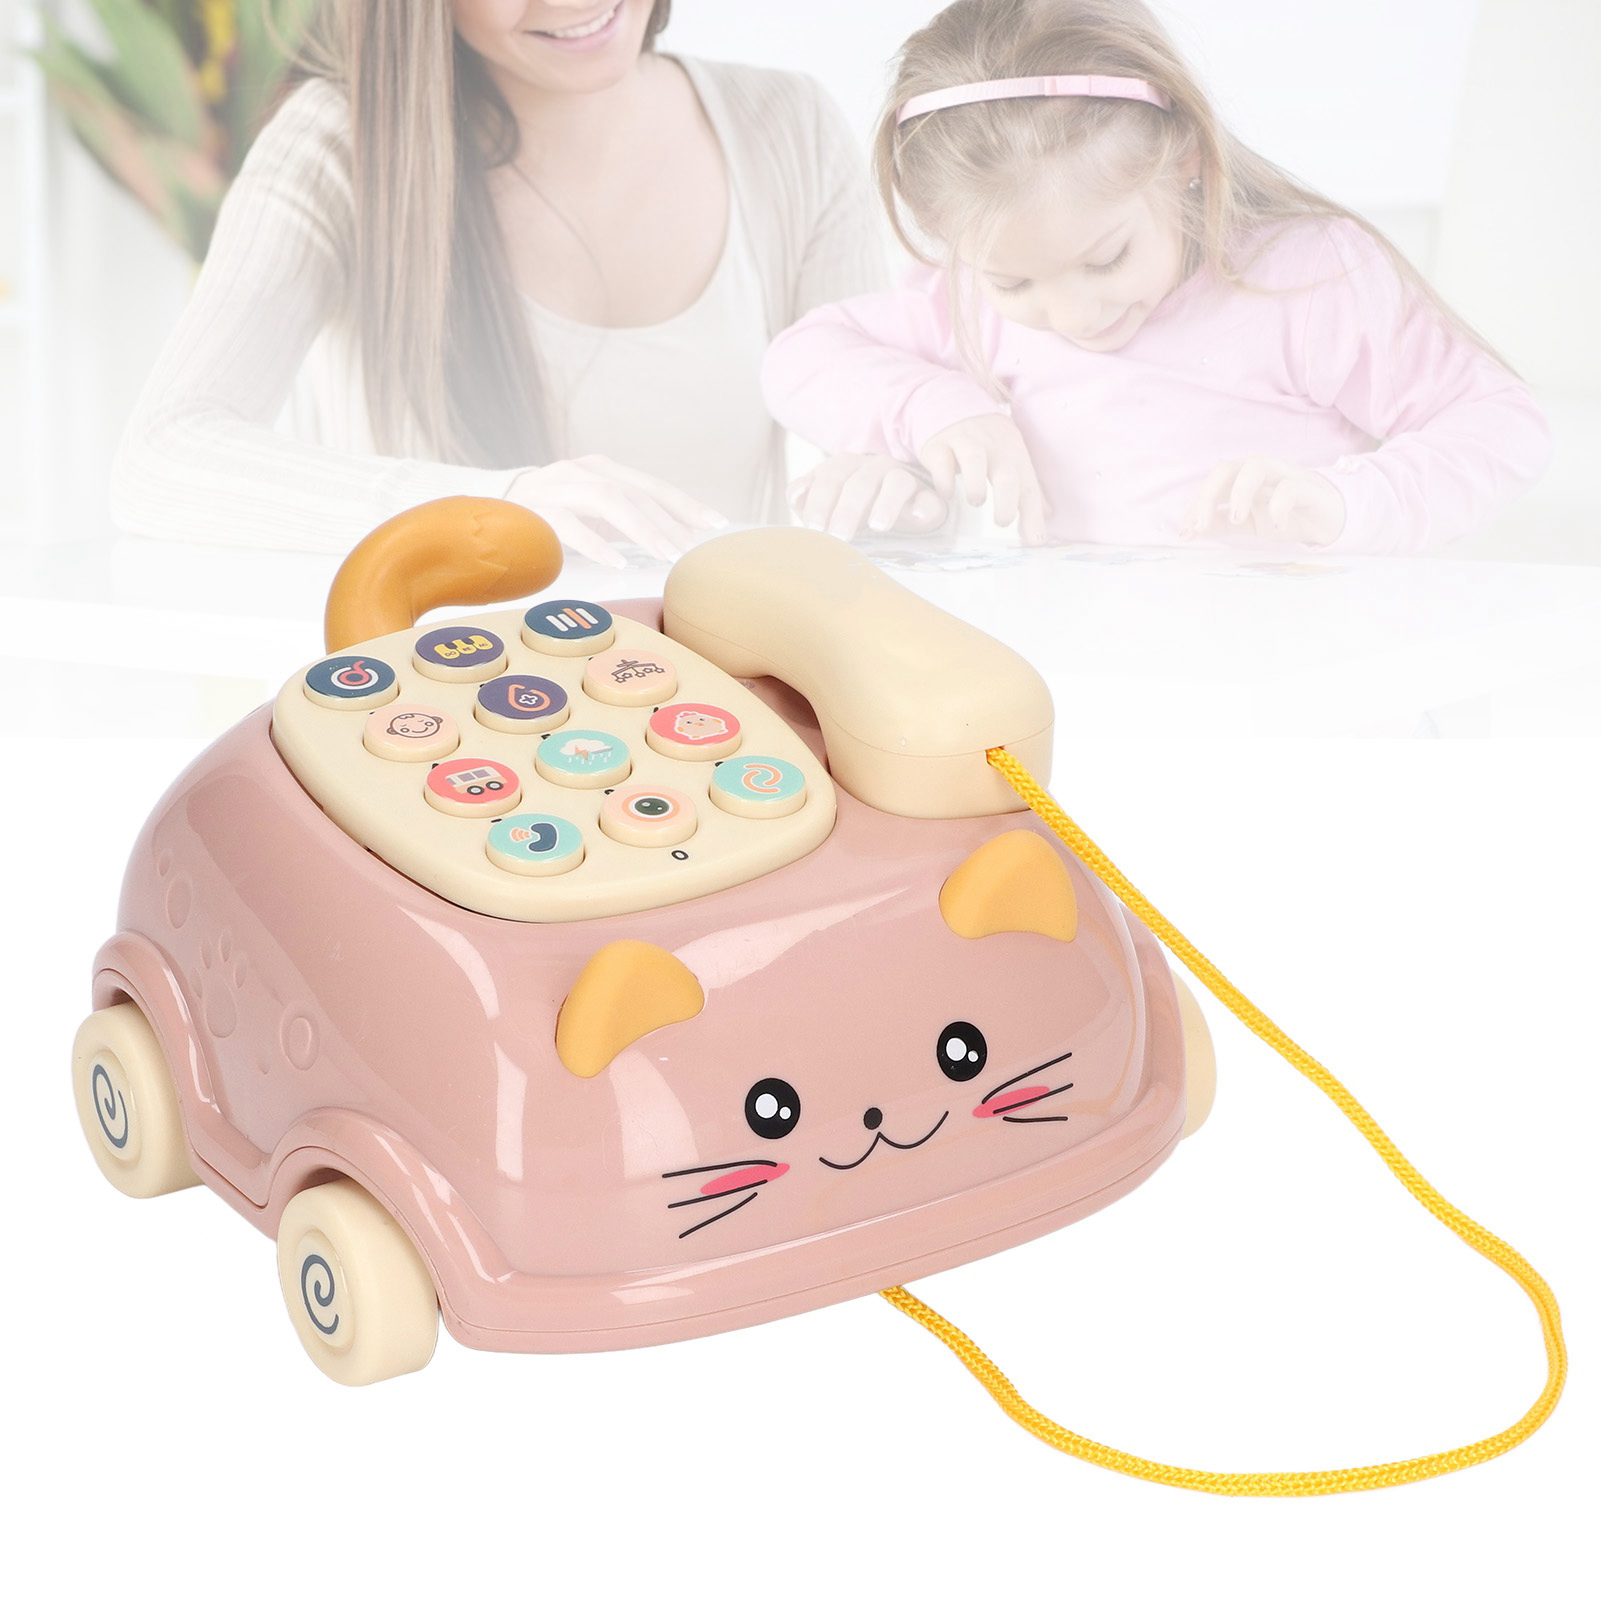 Baby Phone, Plastic Bilingual 12 Buttons Baby Musical Toy  For Enlightment Pink - image 4 of 8